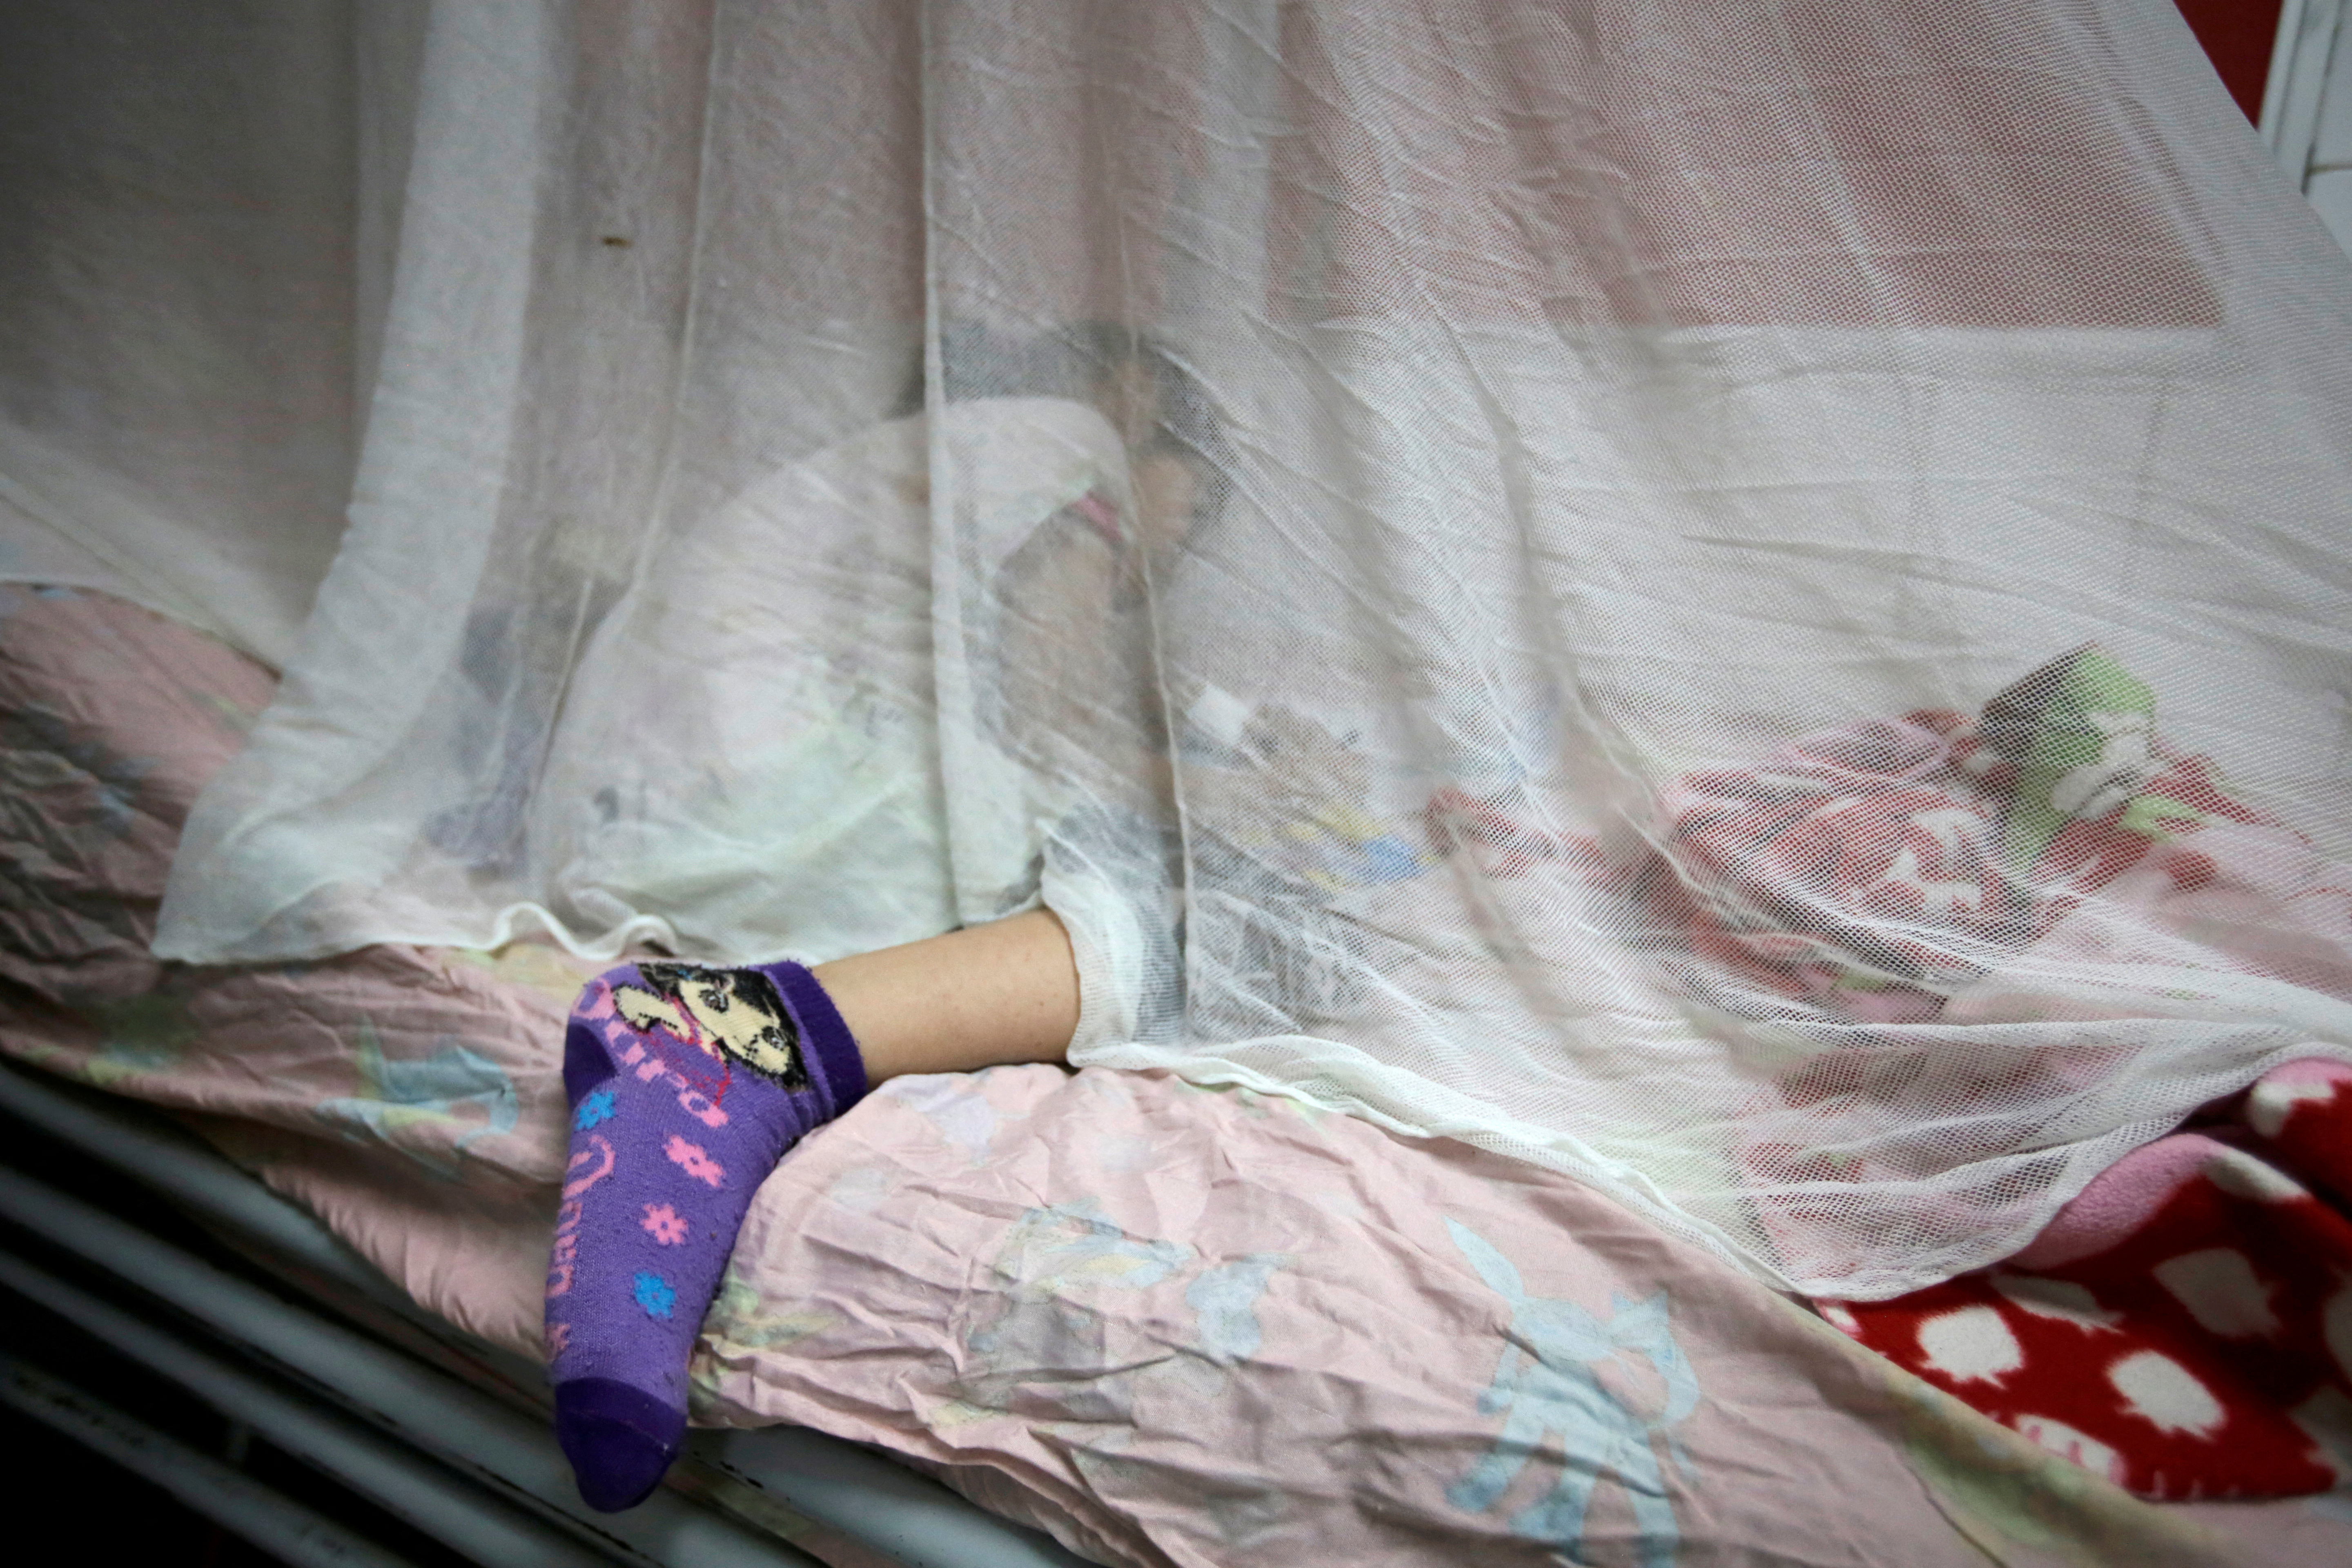 A girl with dengue fever receives attention at Hospital Escuela in Tegucigalpa